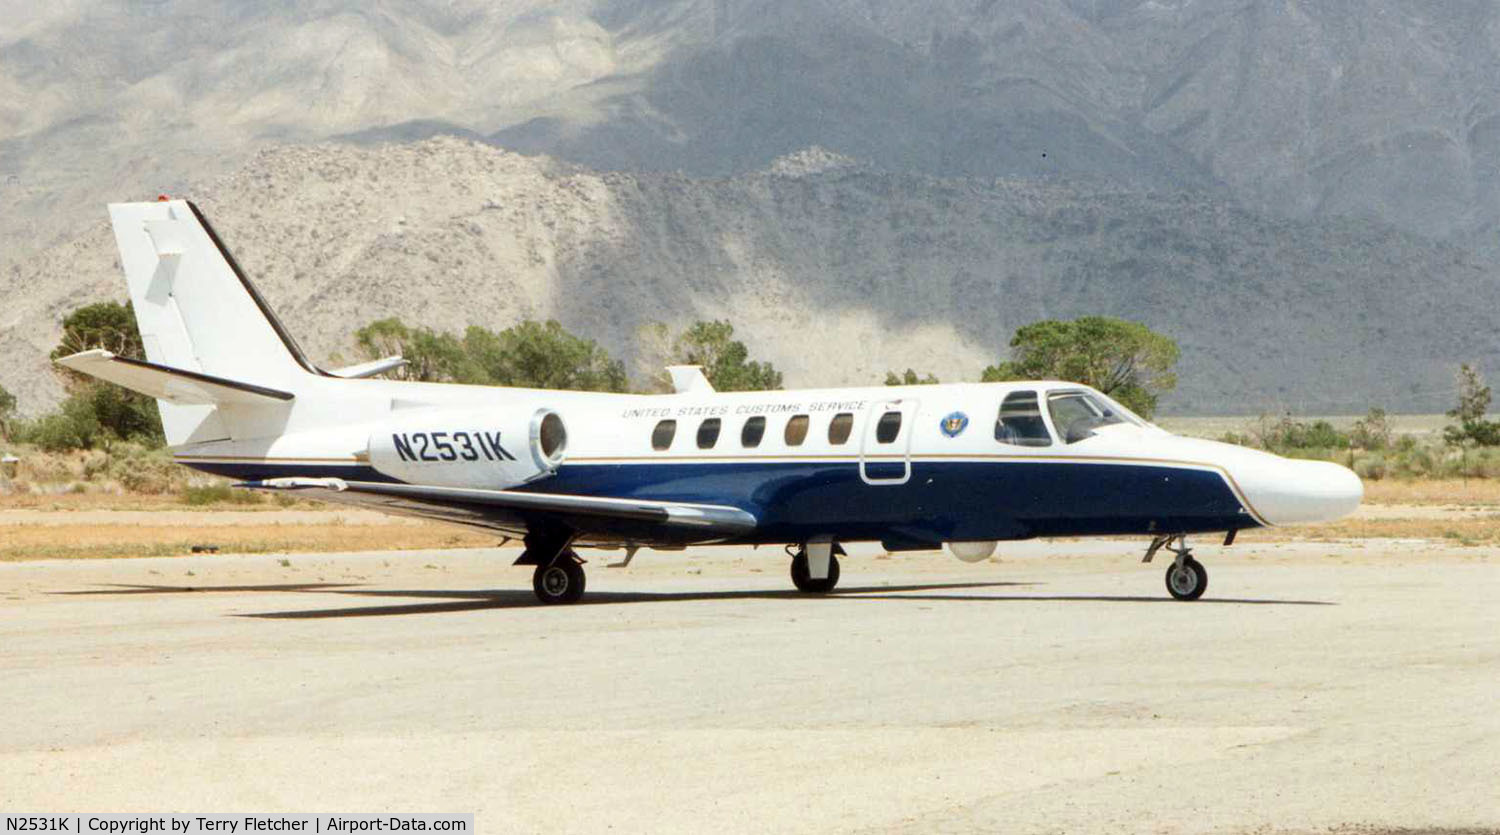 N2531K, 1989 Cessna 550 Citation II C/N 550-0594, US Cutoms Cessna 550 at a small strip in Nevada in 1997